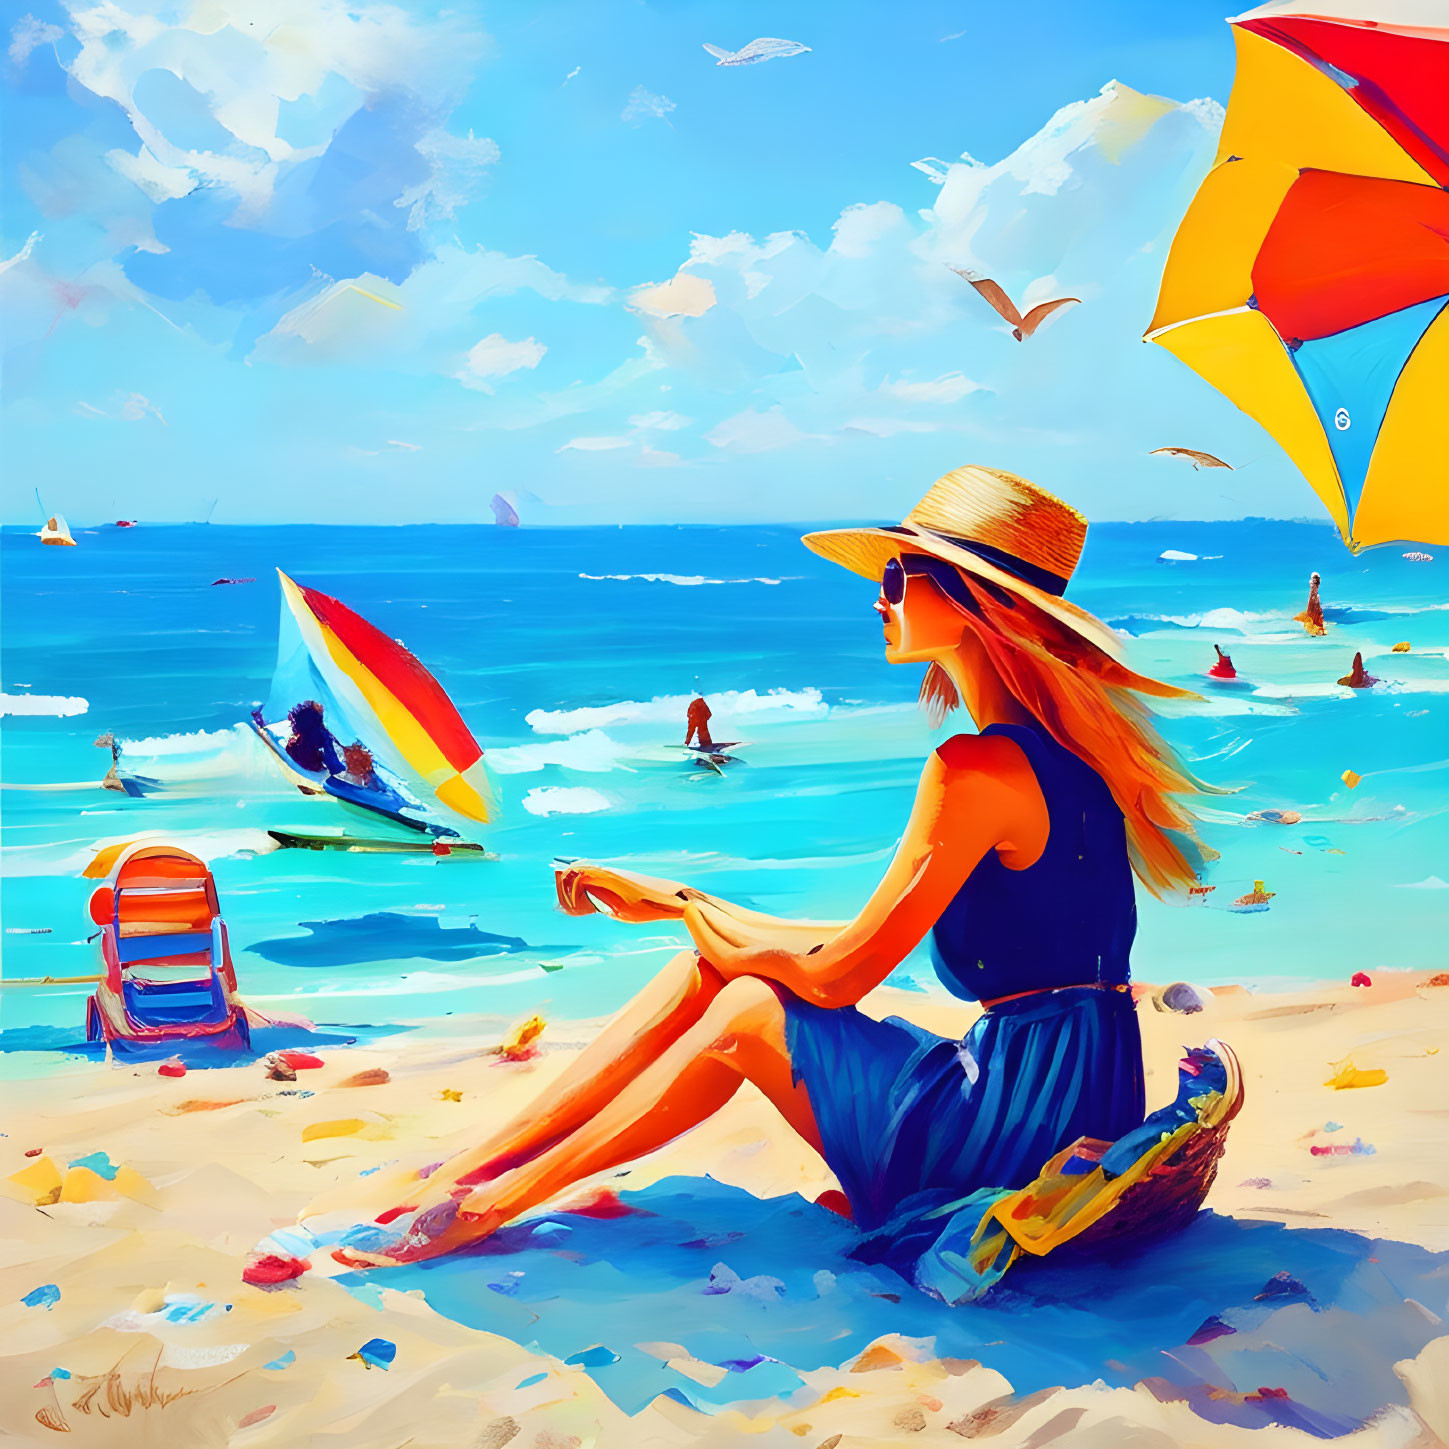 Woman in sunhat on vibrant beach with sailboats and umbrella